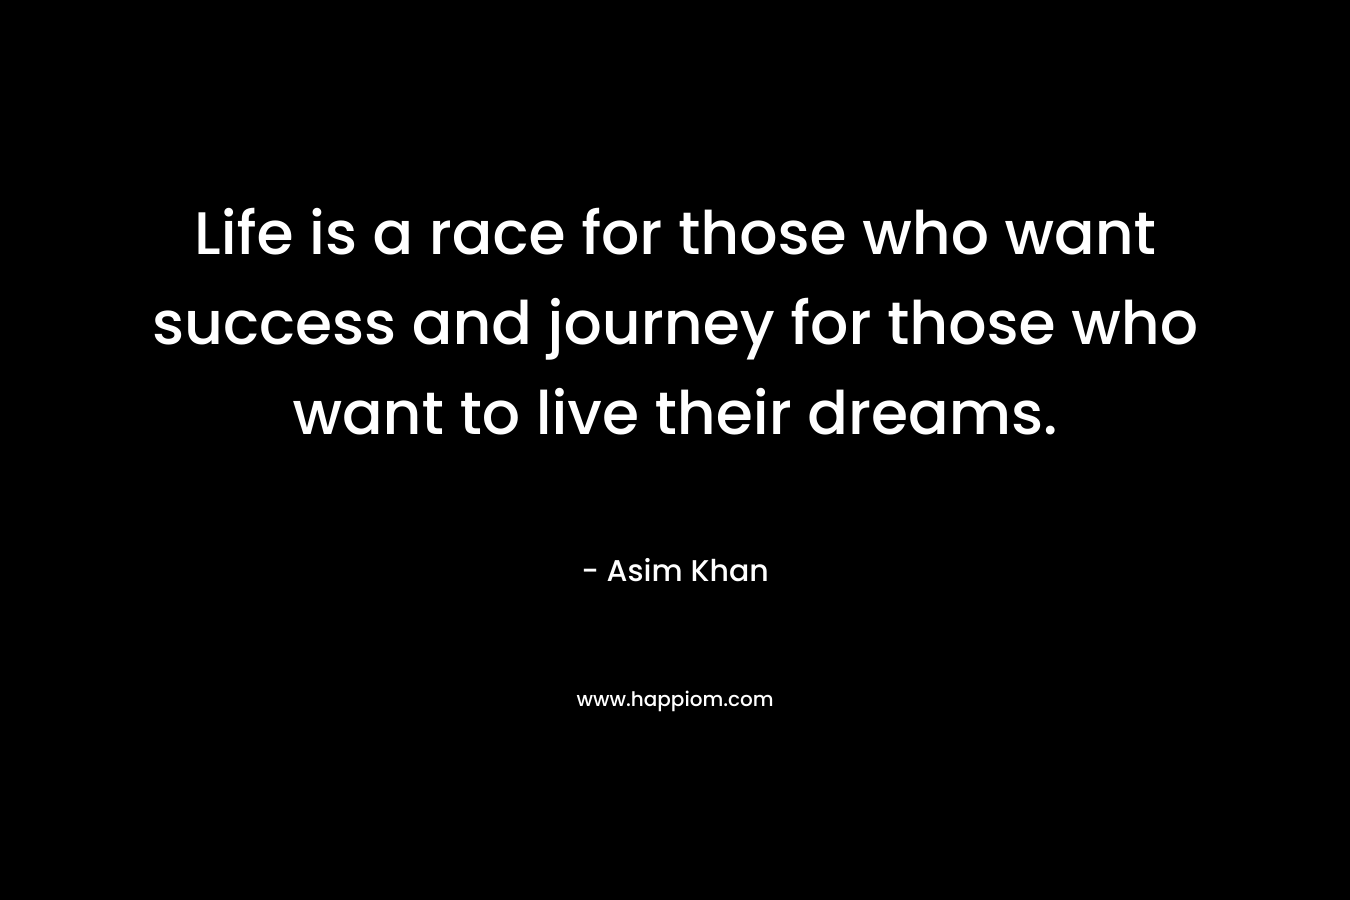 Life is a race for those who want success and journey for those who want to live their dreams.